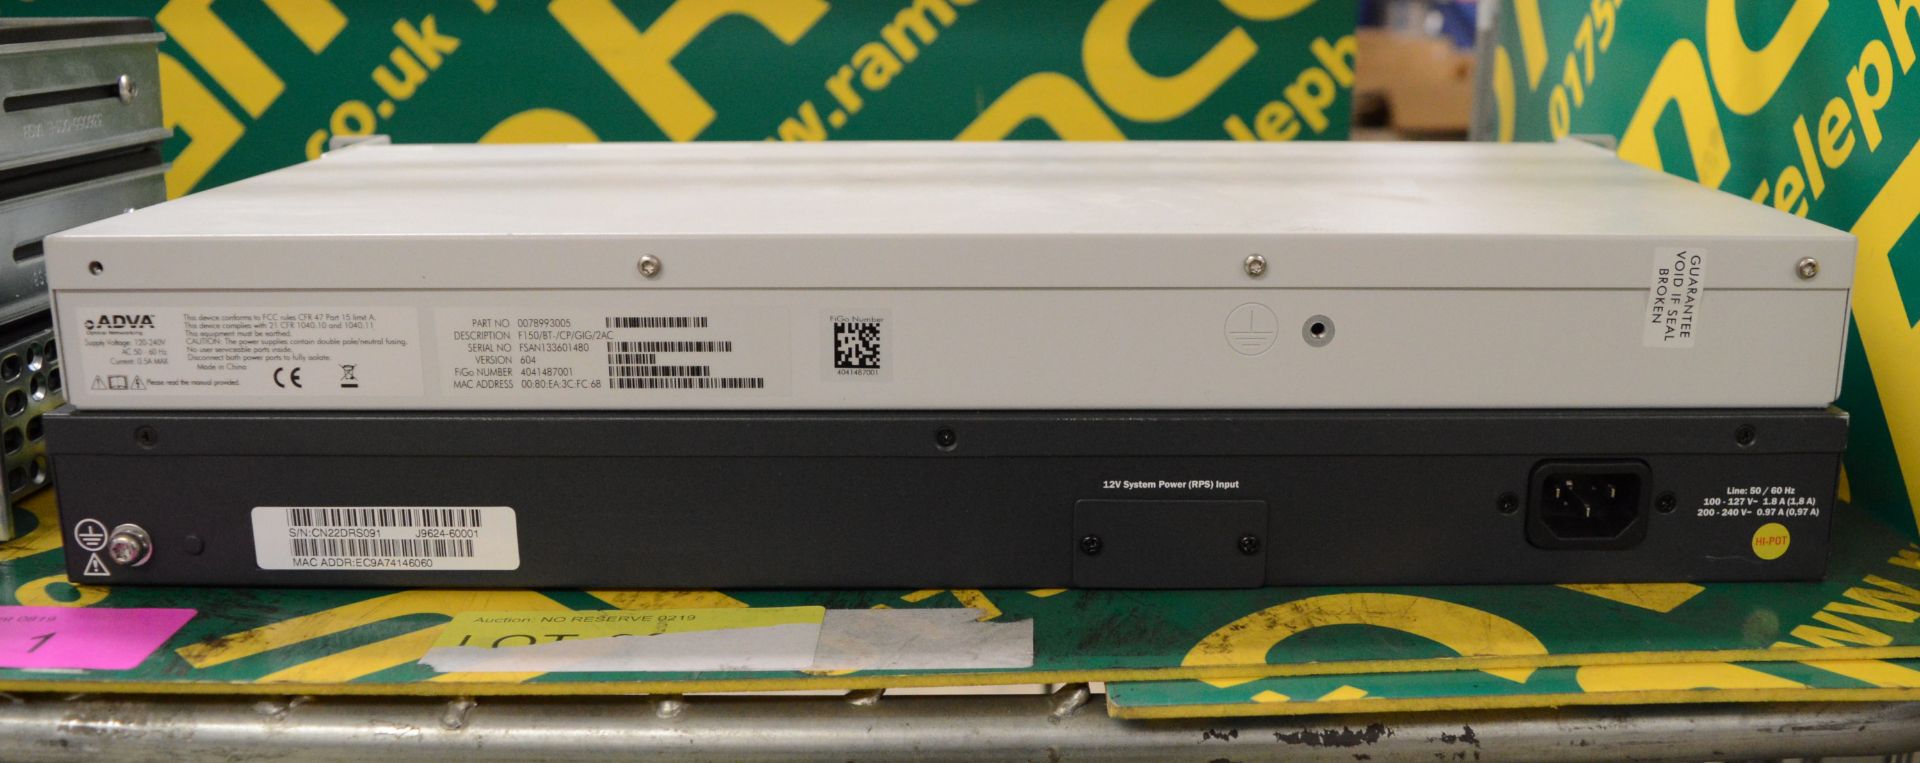 Network Hubs - Cisco Systems Catalyst 2950, Adva FSP150CP, HP E2620-24 PPoE Switch, 2x HP - Image 5 of 5